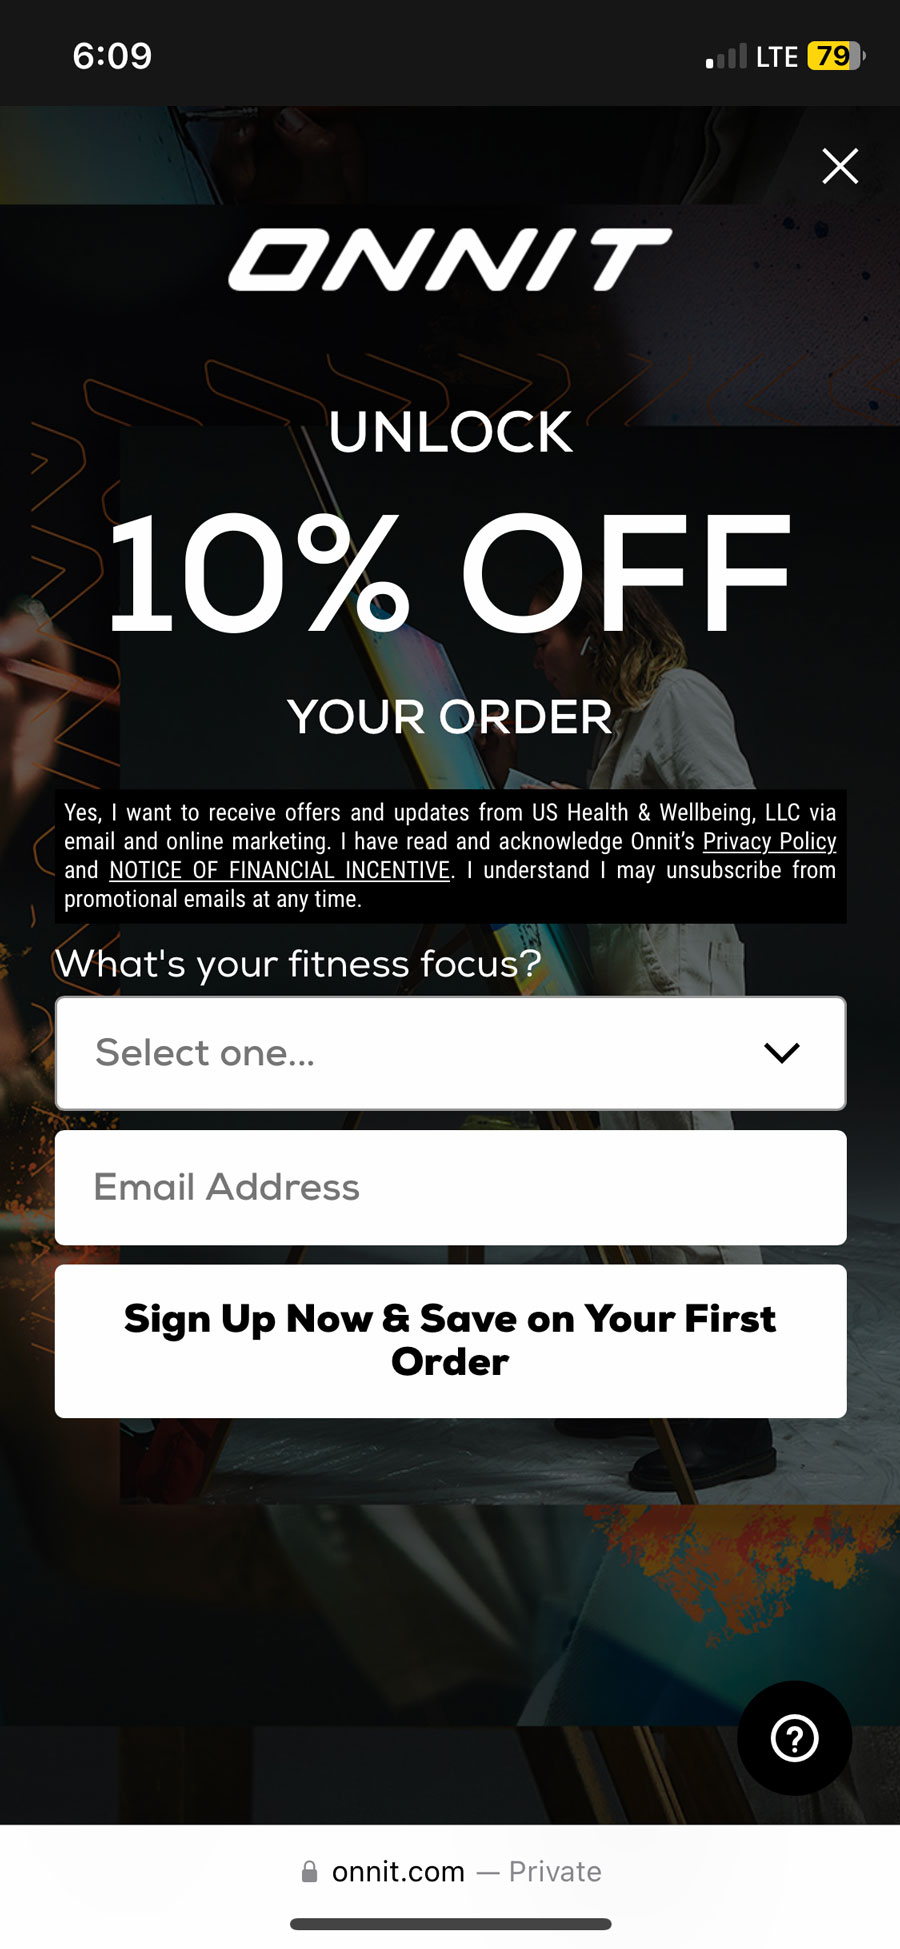 Unlock Savings on Your First Order: Onnit Discount for New Customers